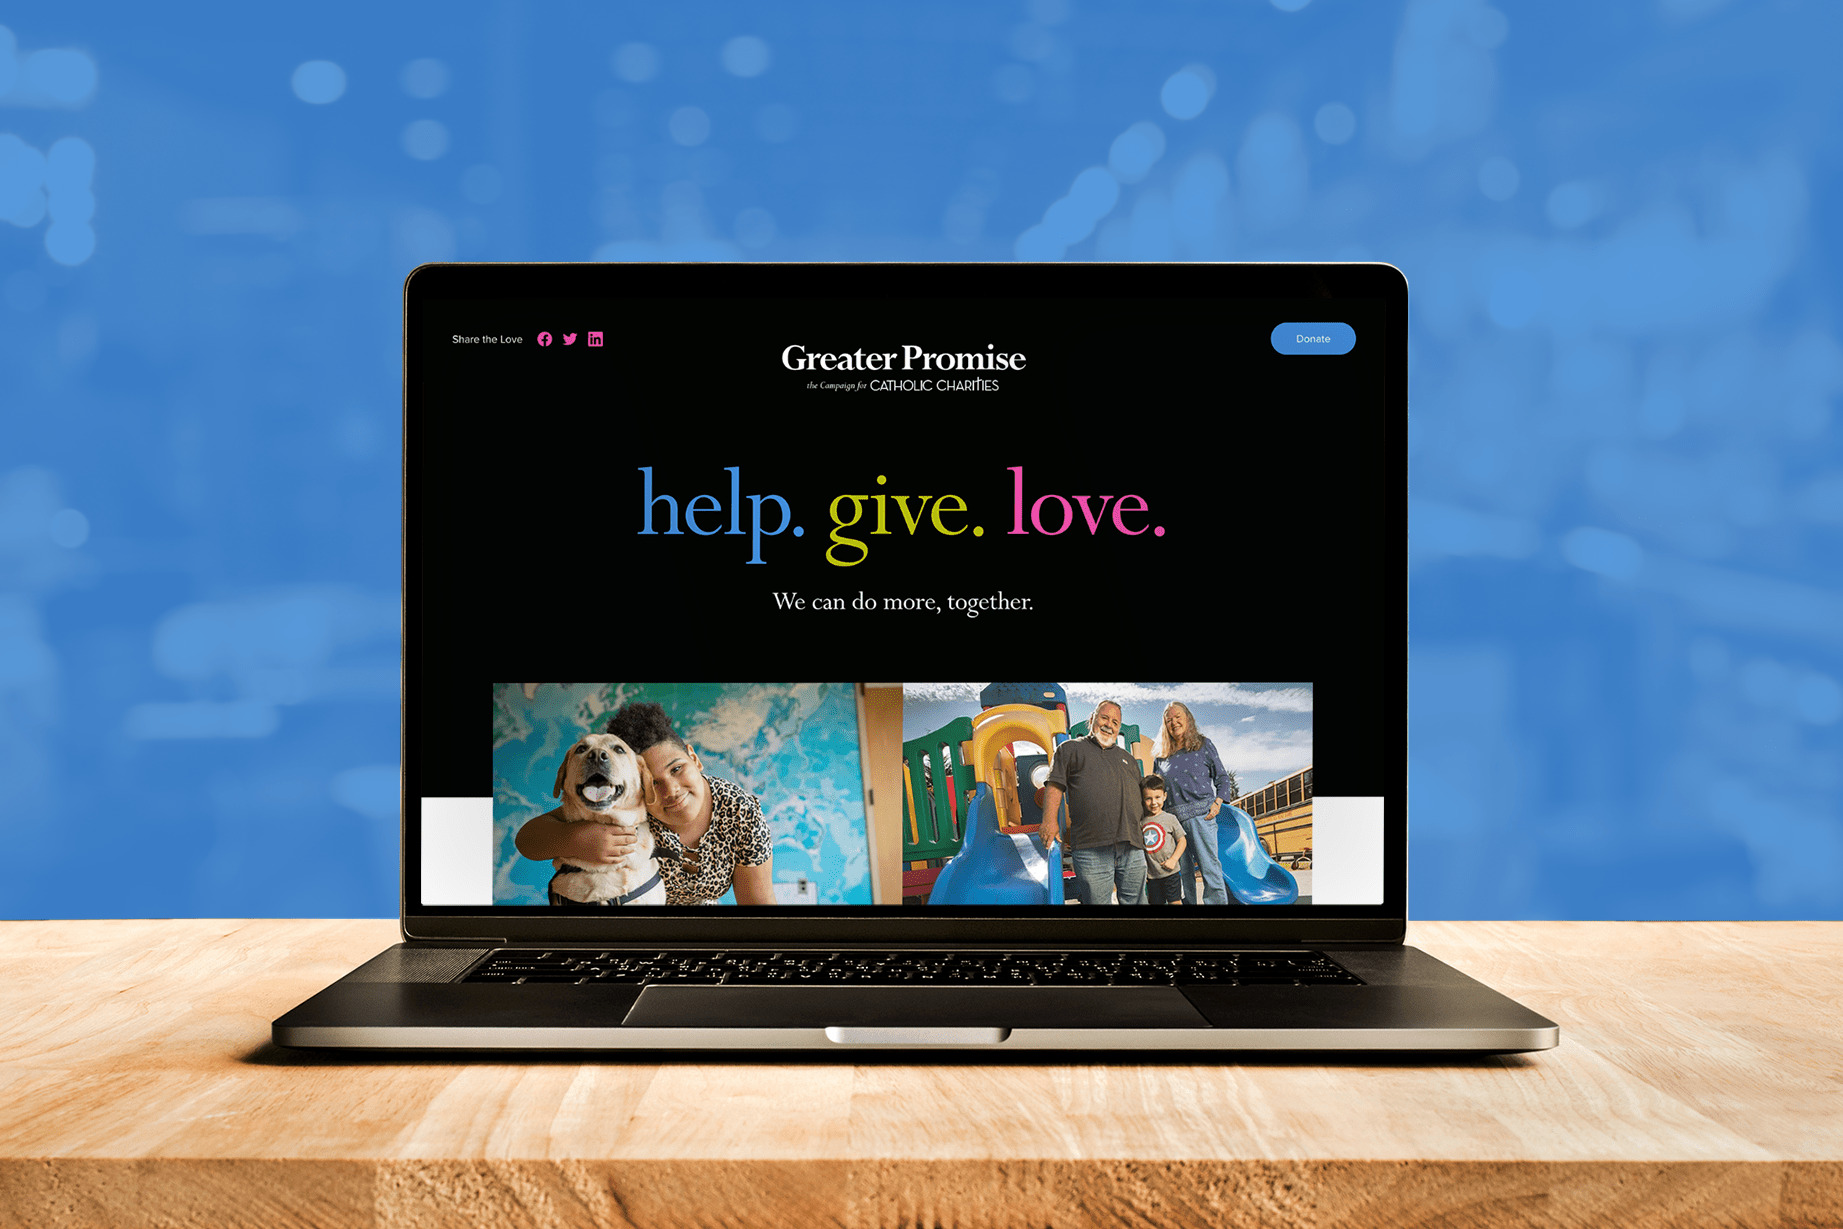 Photo of a laptop computer visiting the Greater Promise campaign microsite.